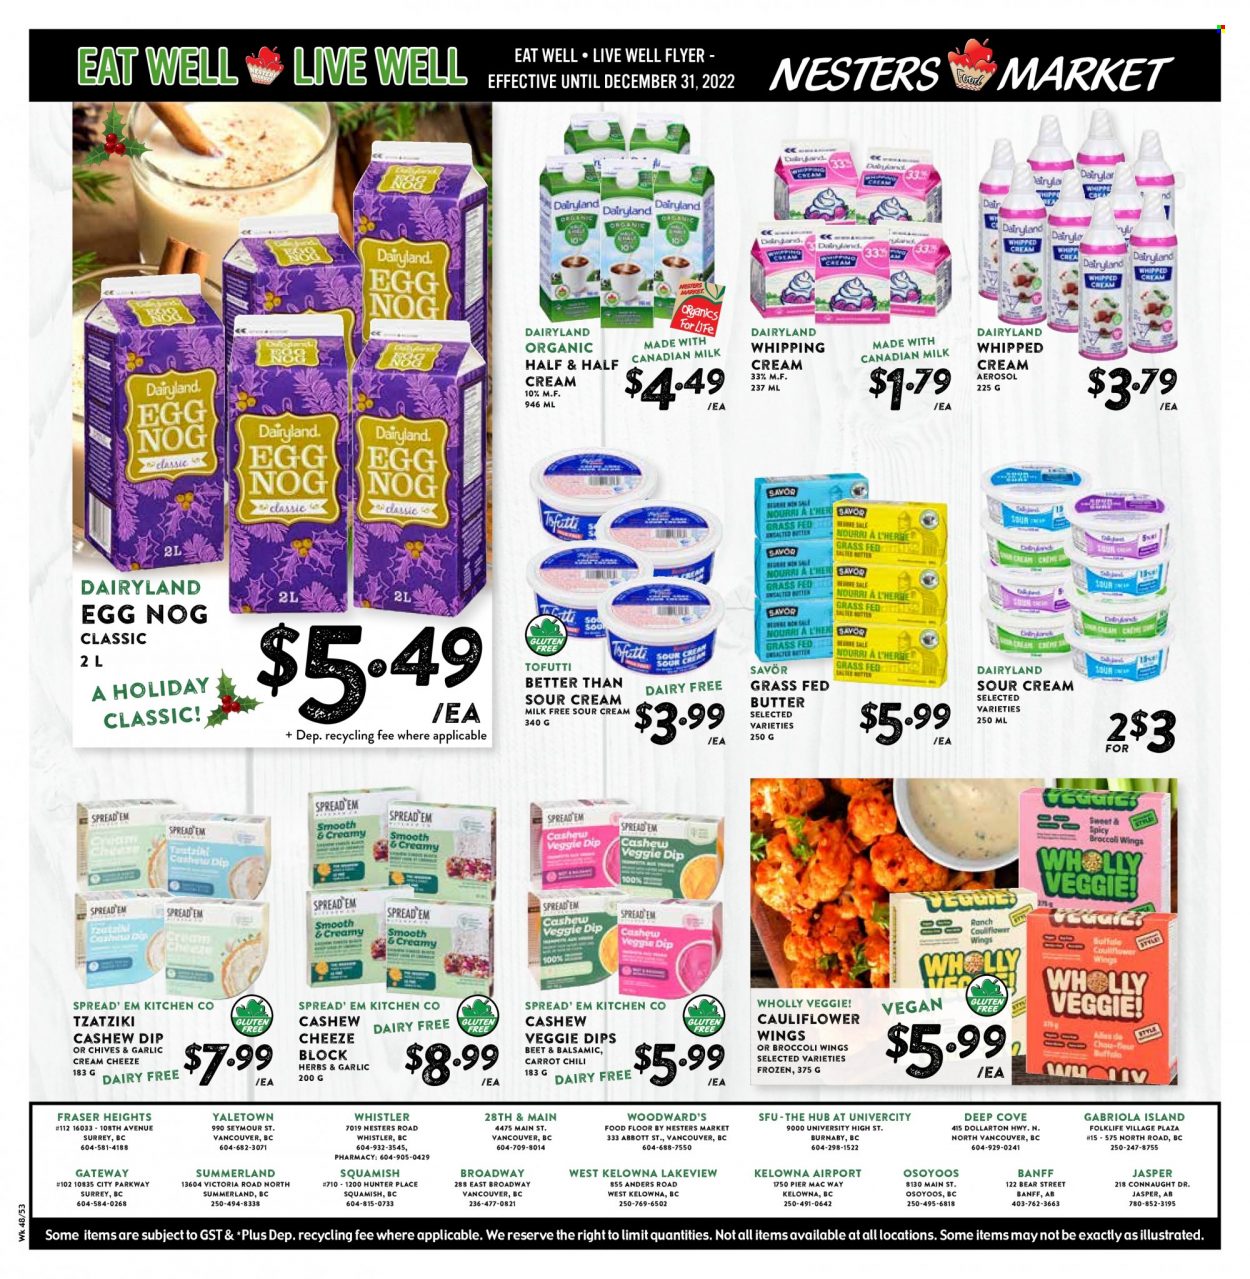 Nesters Food Market Flyer - November 20, 2022 - December 31, 2022 - Sales products - broccoli, chives, tzatziki, milk, eggs, butter, sour cream, whipped cream, whipping cream, dip, herbs, Half and half. Page 6.